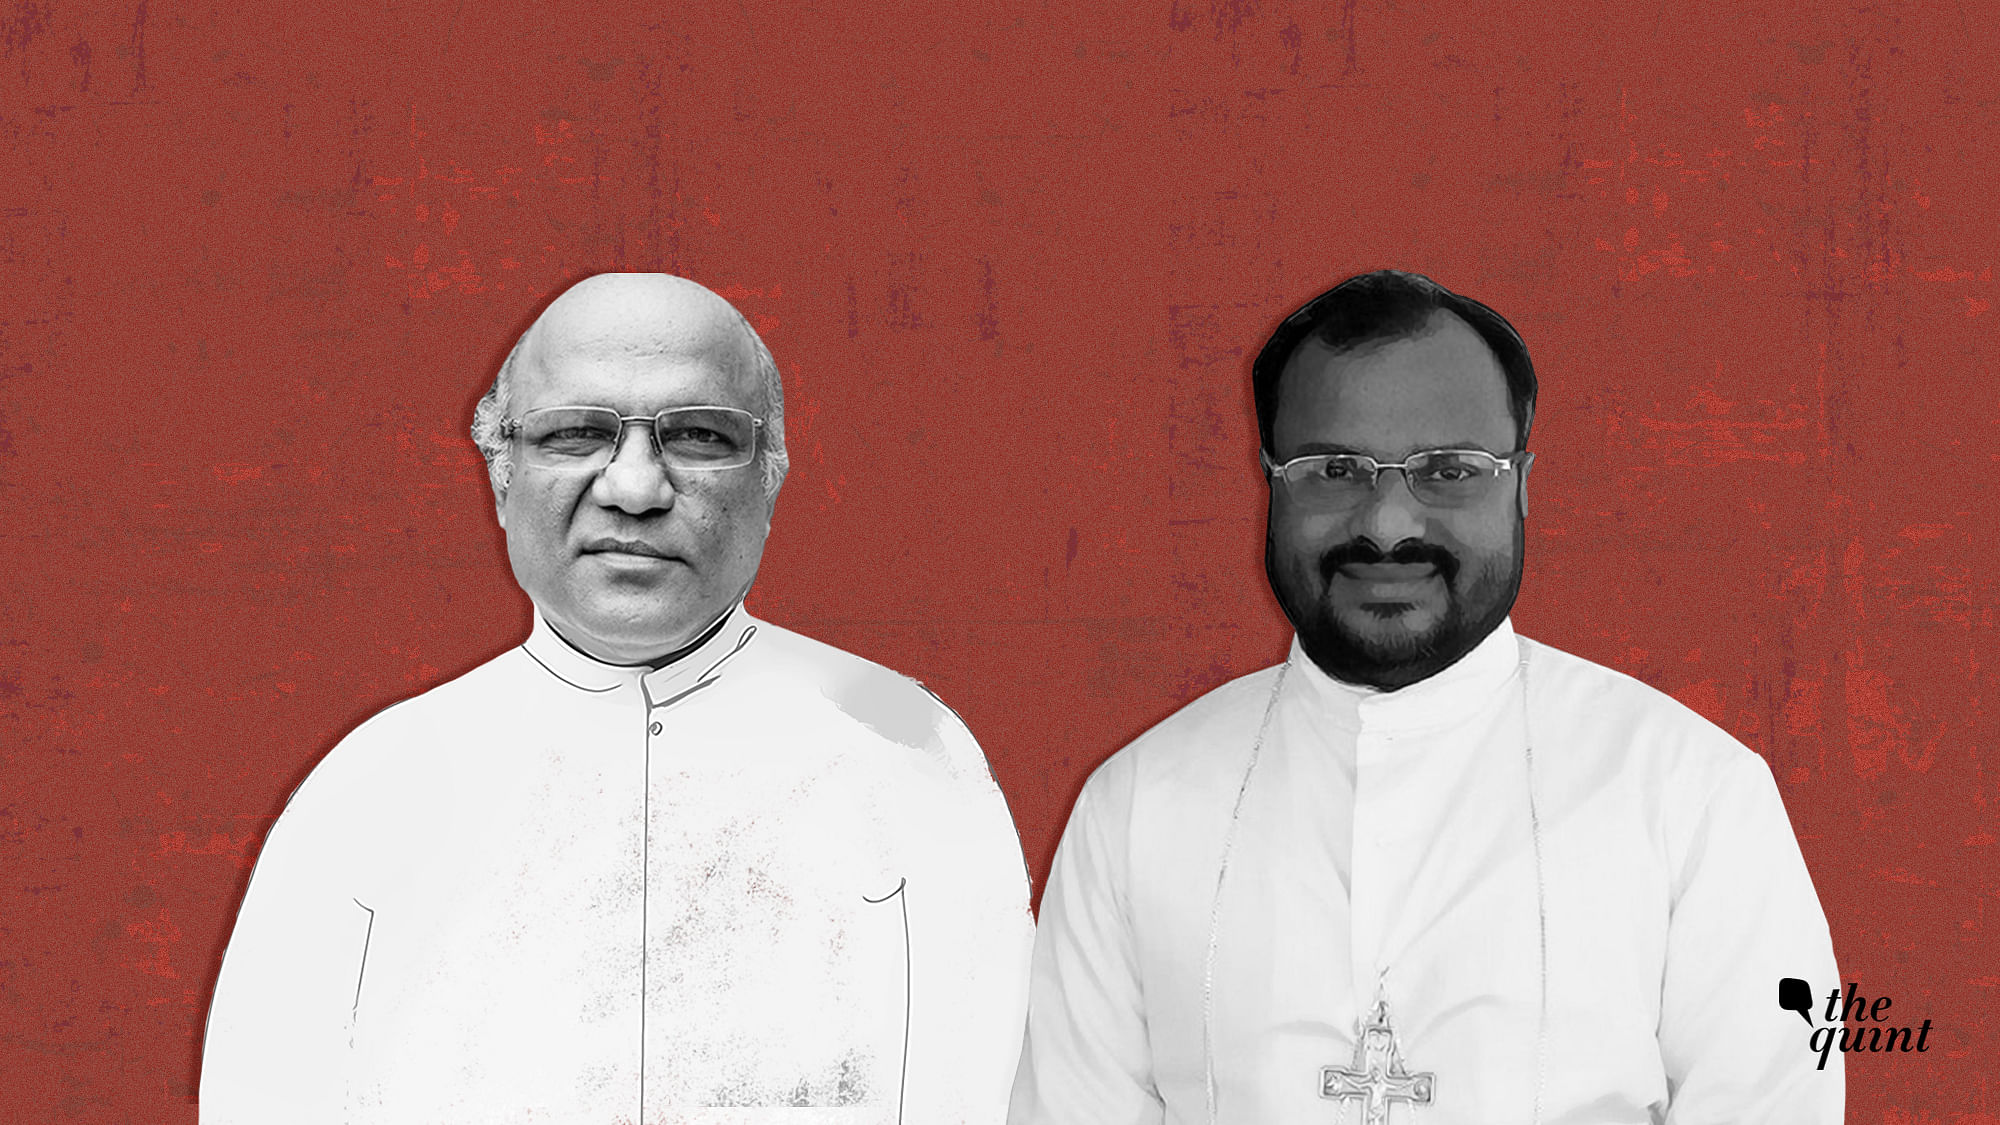 Father Kuriakose Kattuthara (L), one of the prime witnesses who had testified against rape accused Bishop Franco Mulakkal (R), was found dead in Jalandhar on Monday, 22 October.